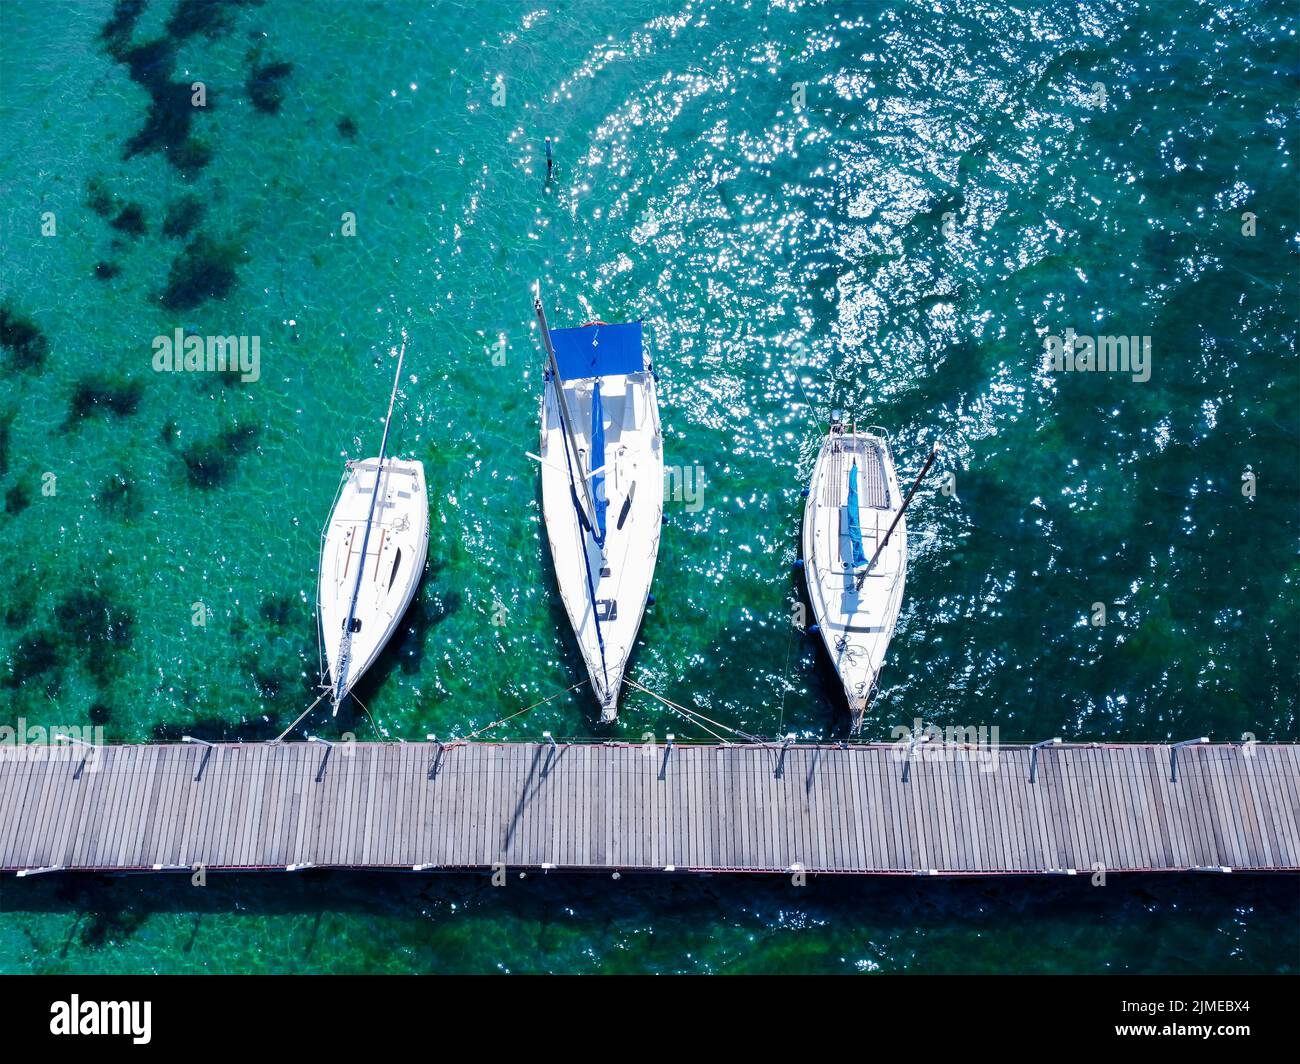 Boats at the pier in the Mediterranean Sea. Turquoise clear water. Recreation and tourism between Europe and Asia. Stock Photo